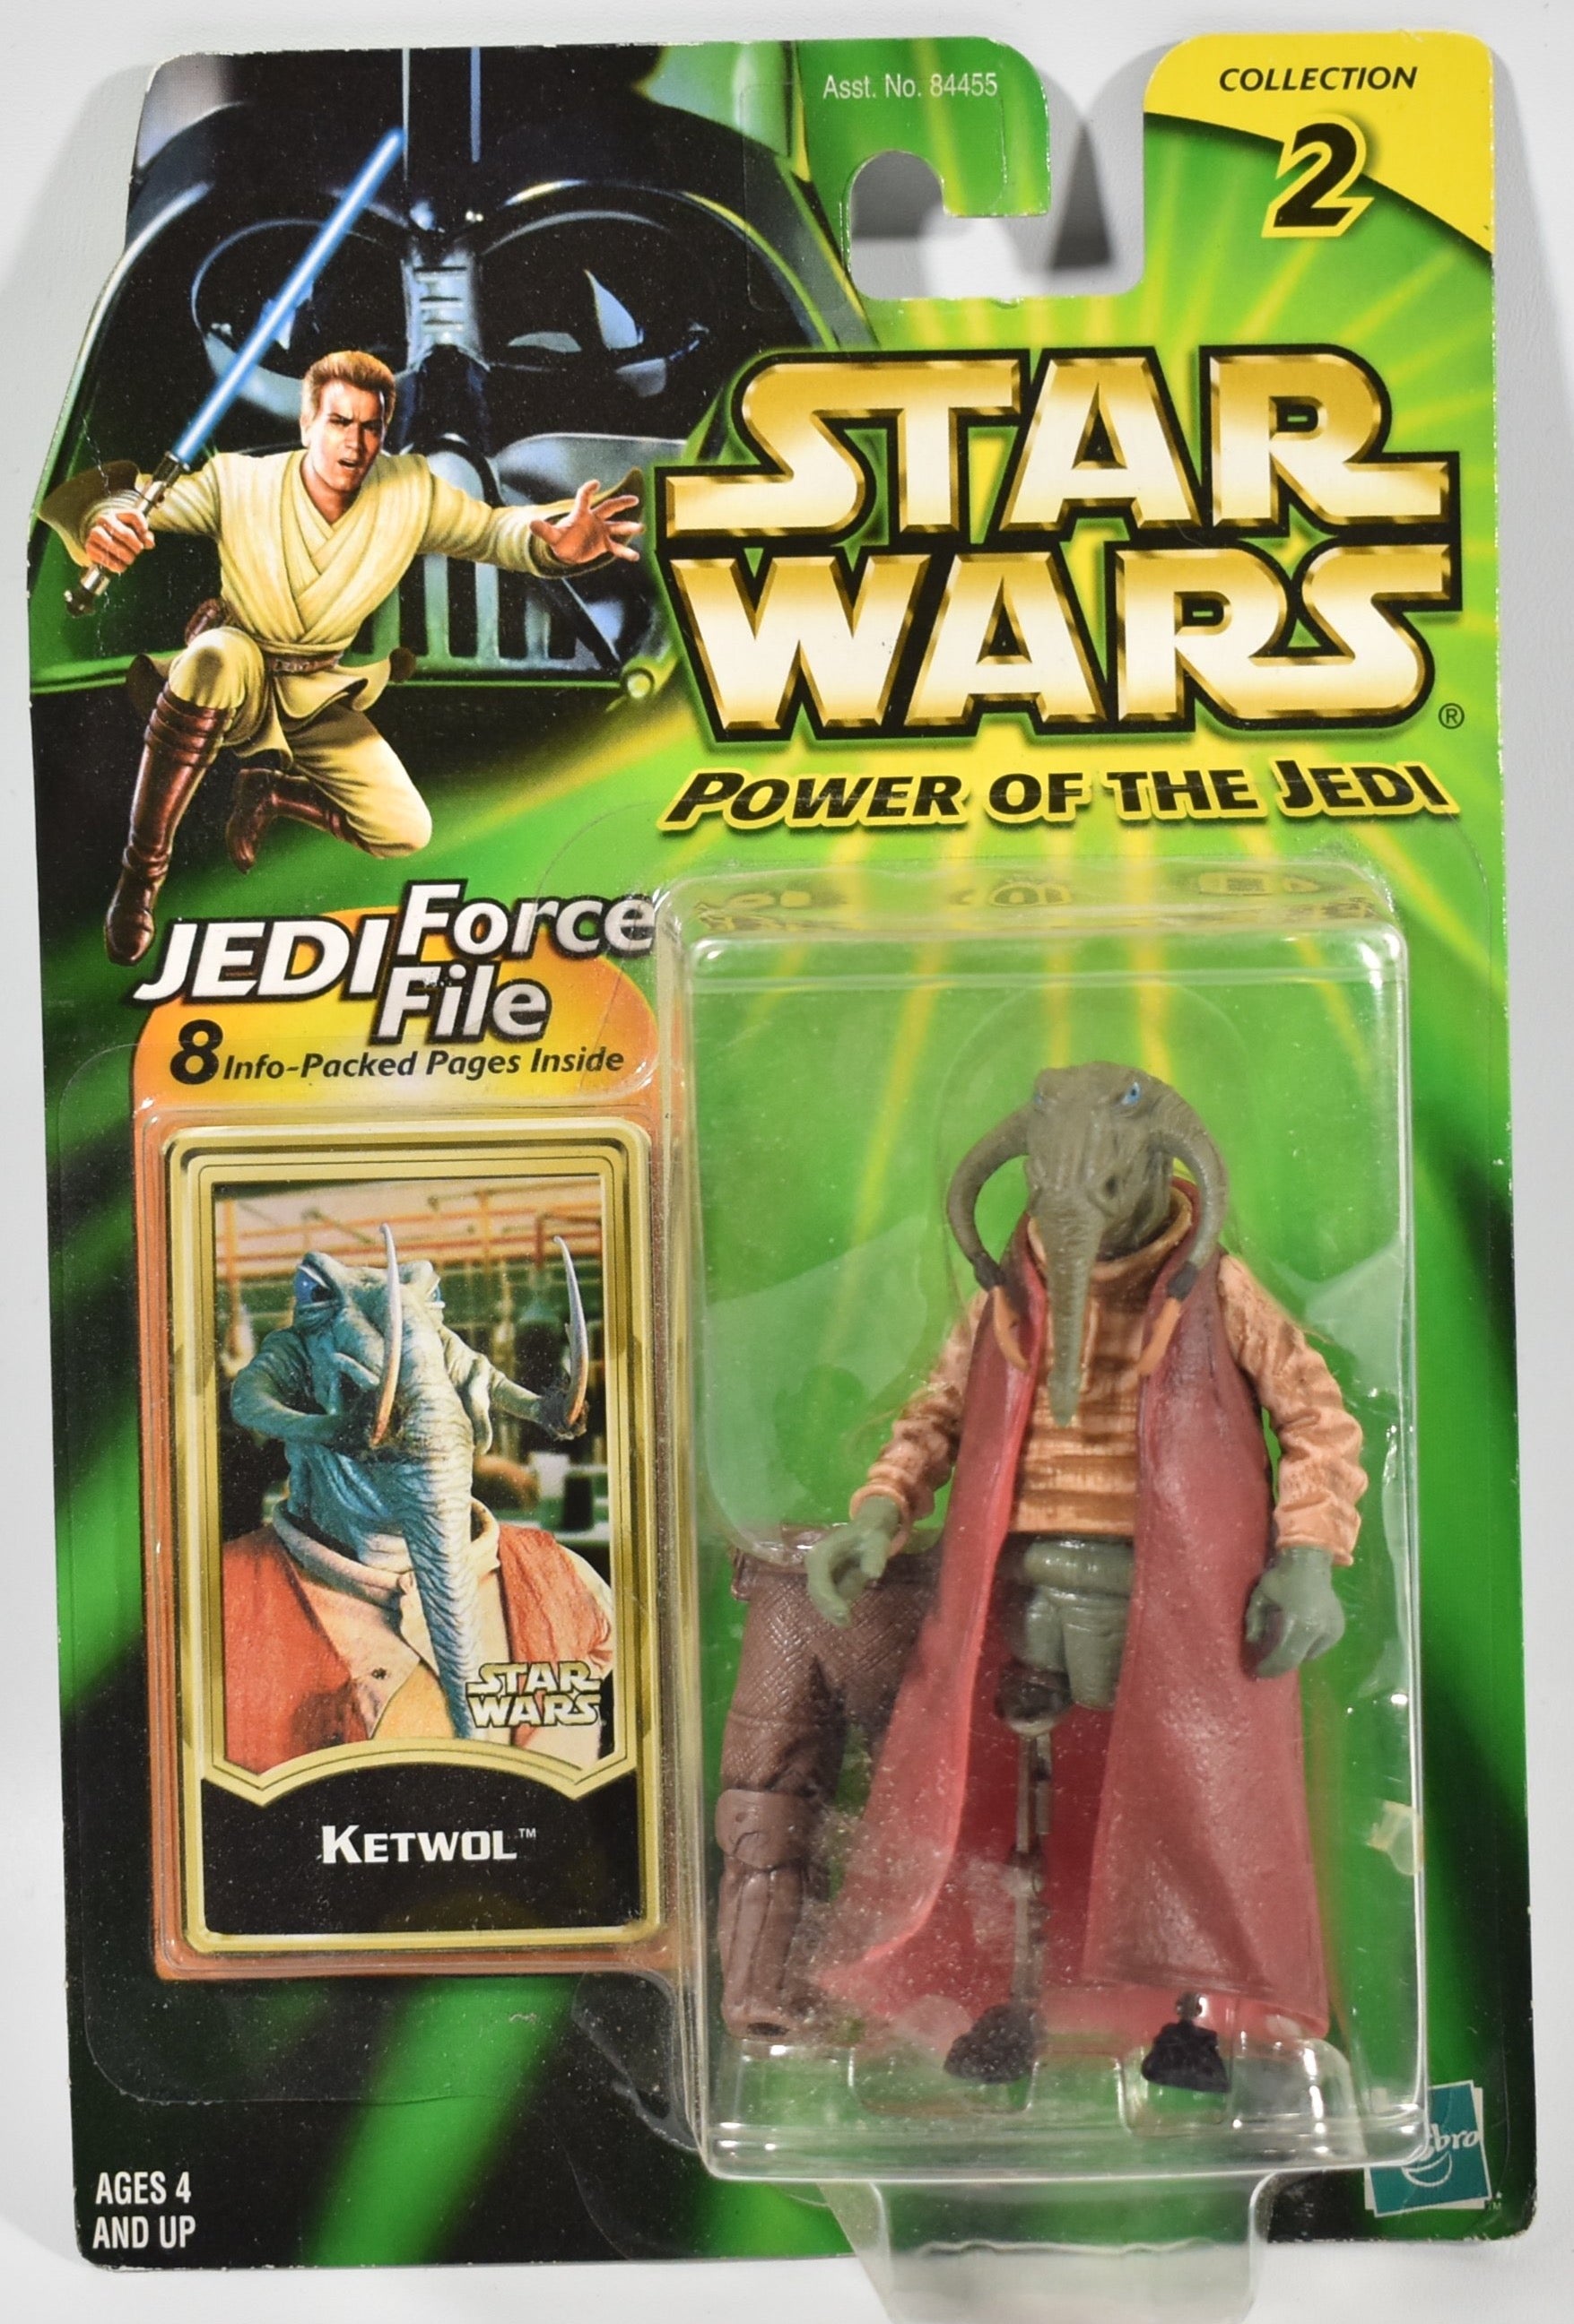 Star Wars Power of the Jedi Action Figure Ketwol Hasbro Collection 2